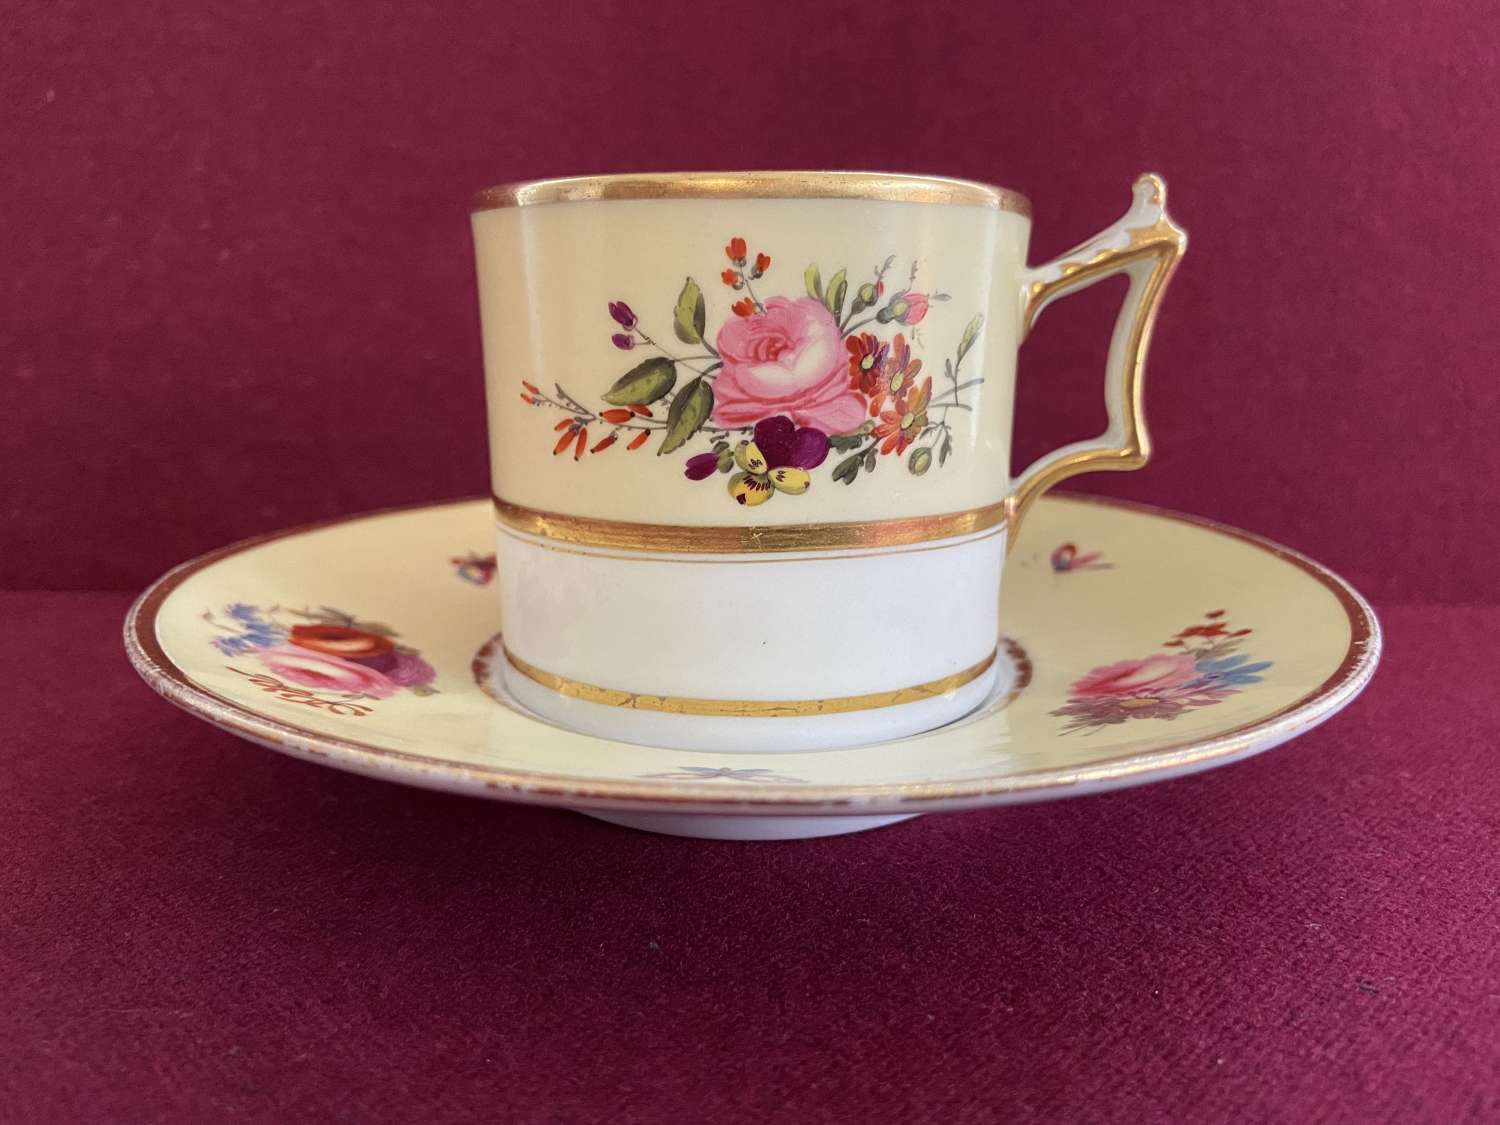 A Flight Barr and Barr Coffee Can & Saucer c.1815-1820